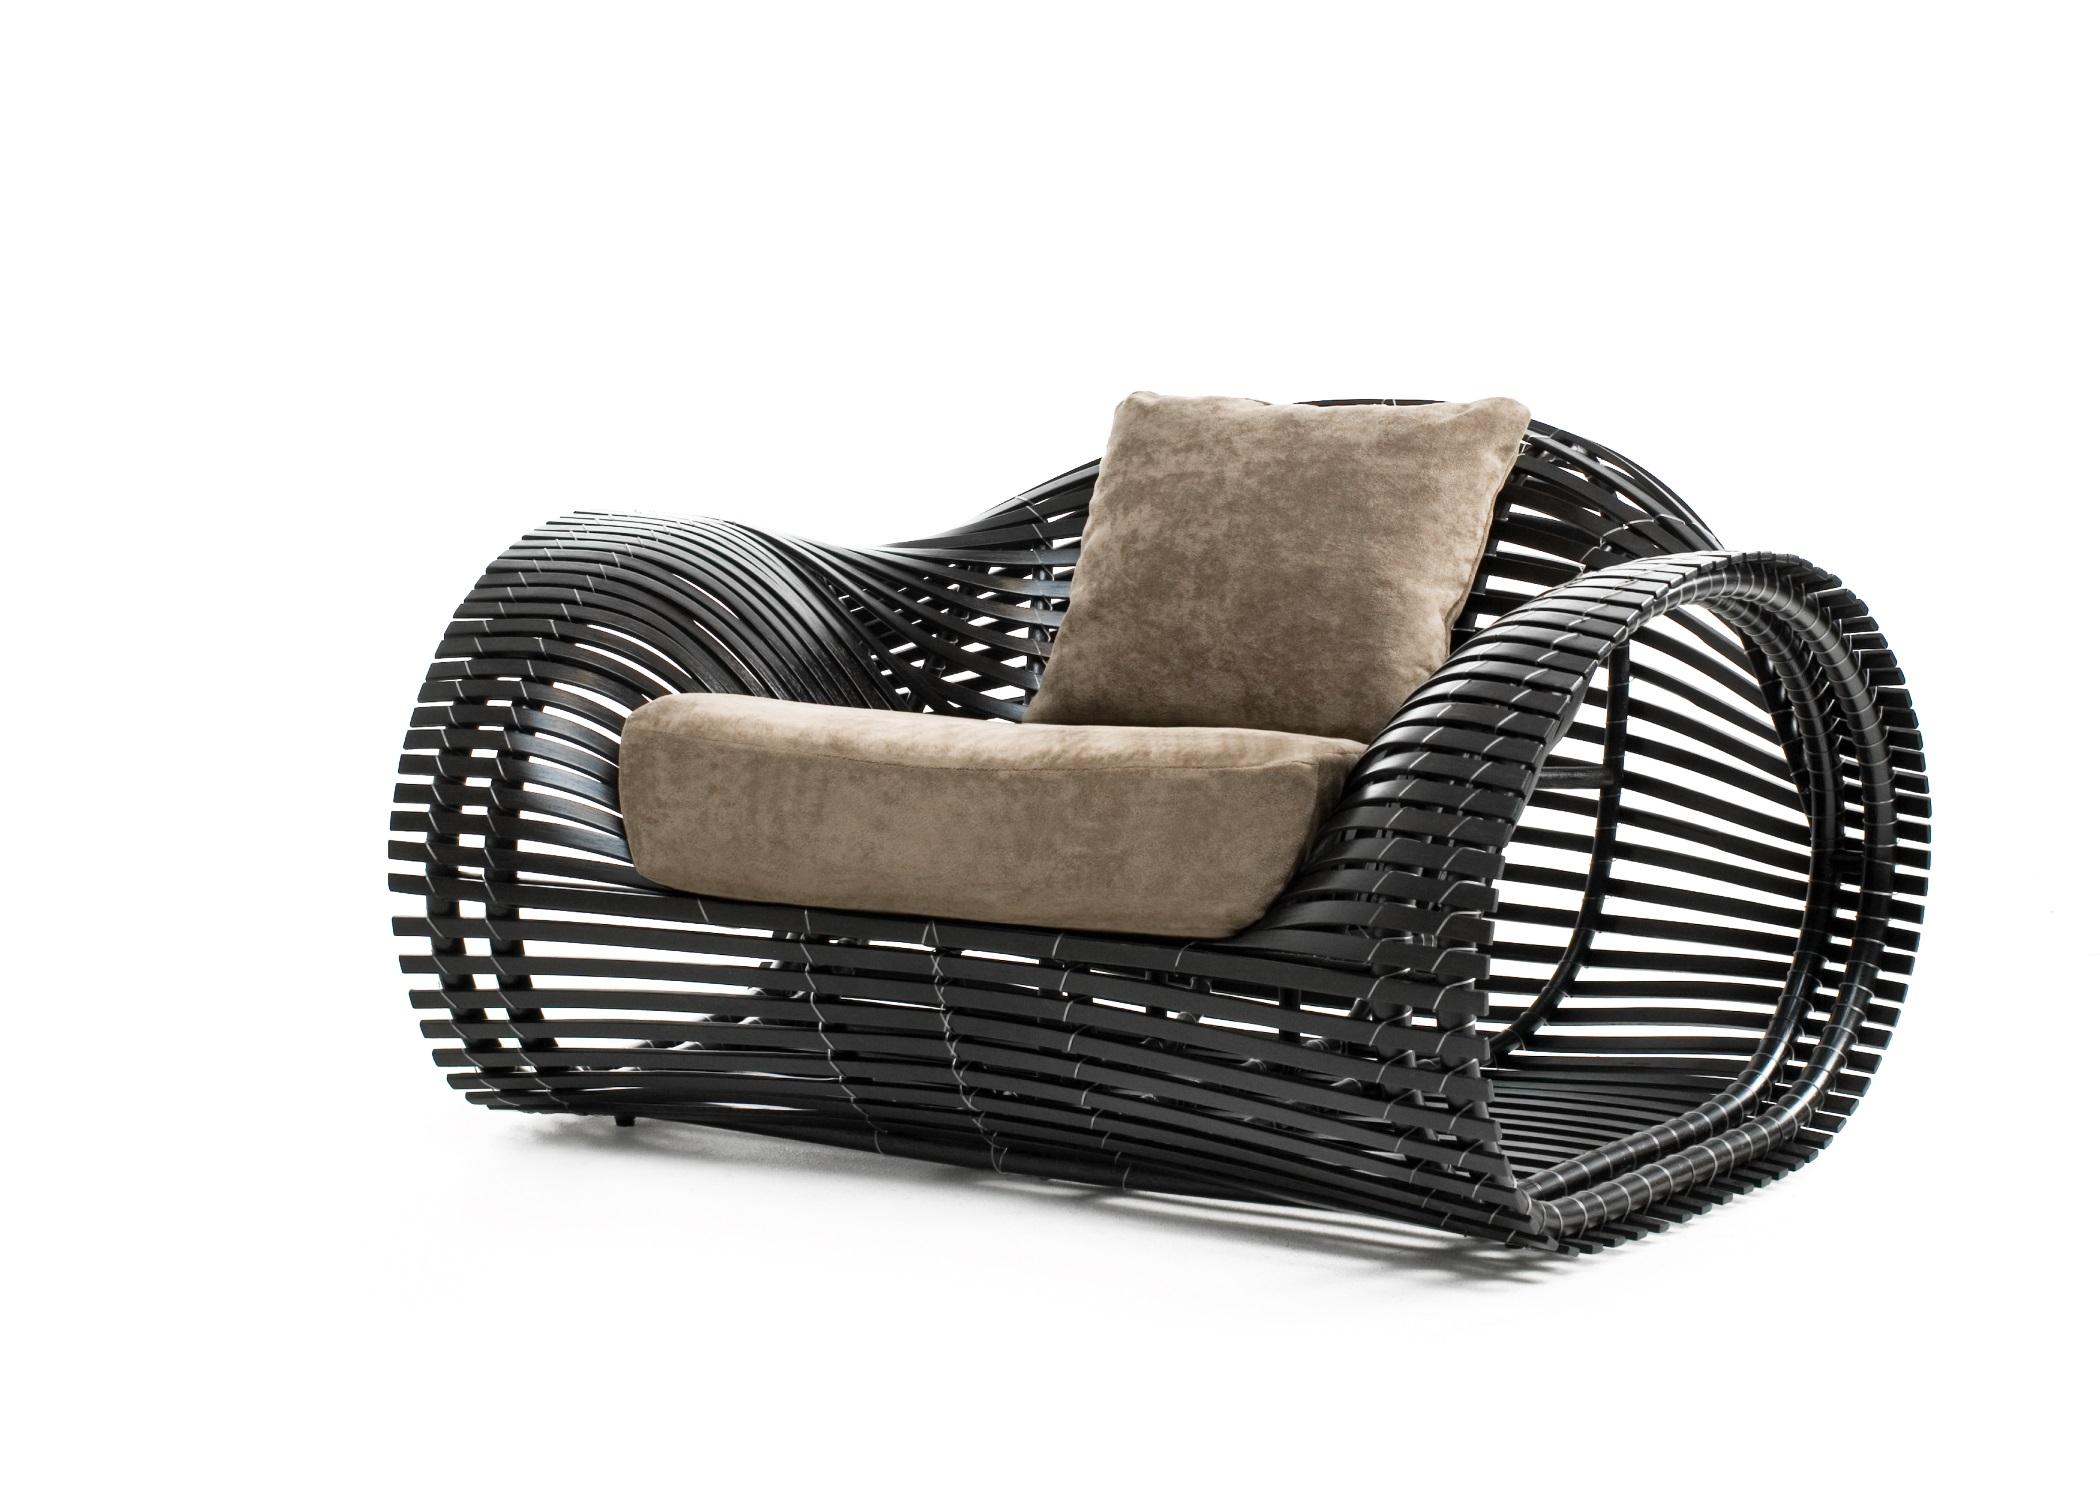 Indoor Lolah easy armchair by Kenneth Cobonpue
Materials: Rattan, nylon.
Also available in other colors and for outdoors. 
Dimensions: 103cm x 126cm x H 70cm

Created using construction techniques similar to boat-building, Lolah entices the